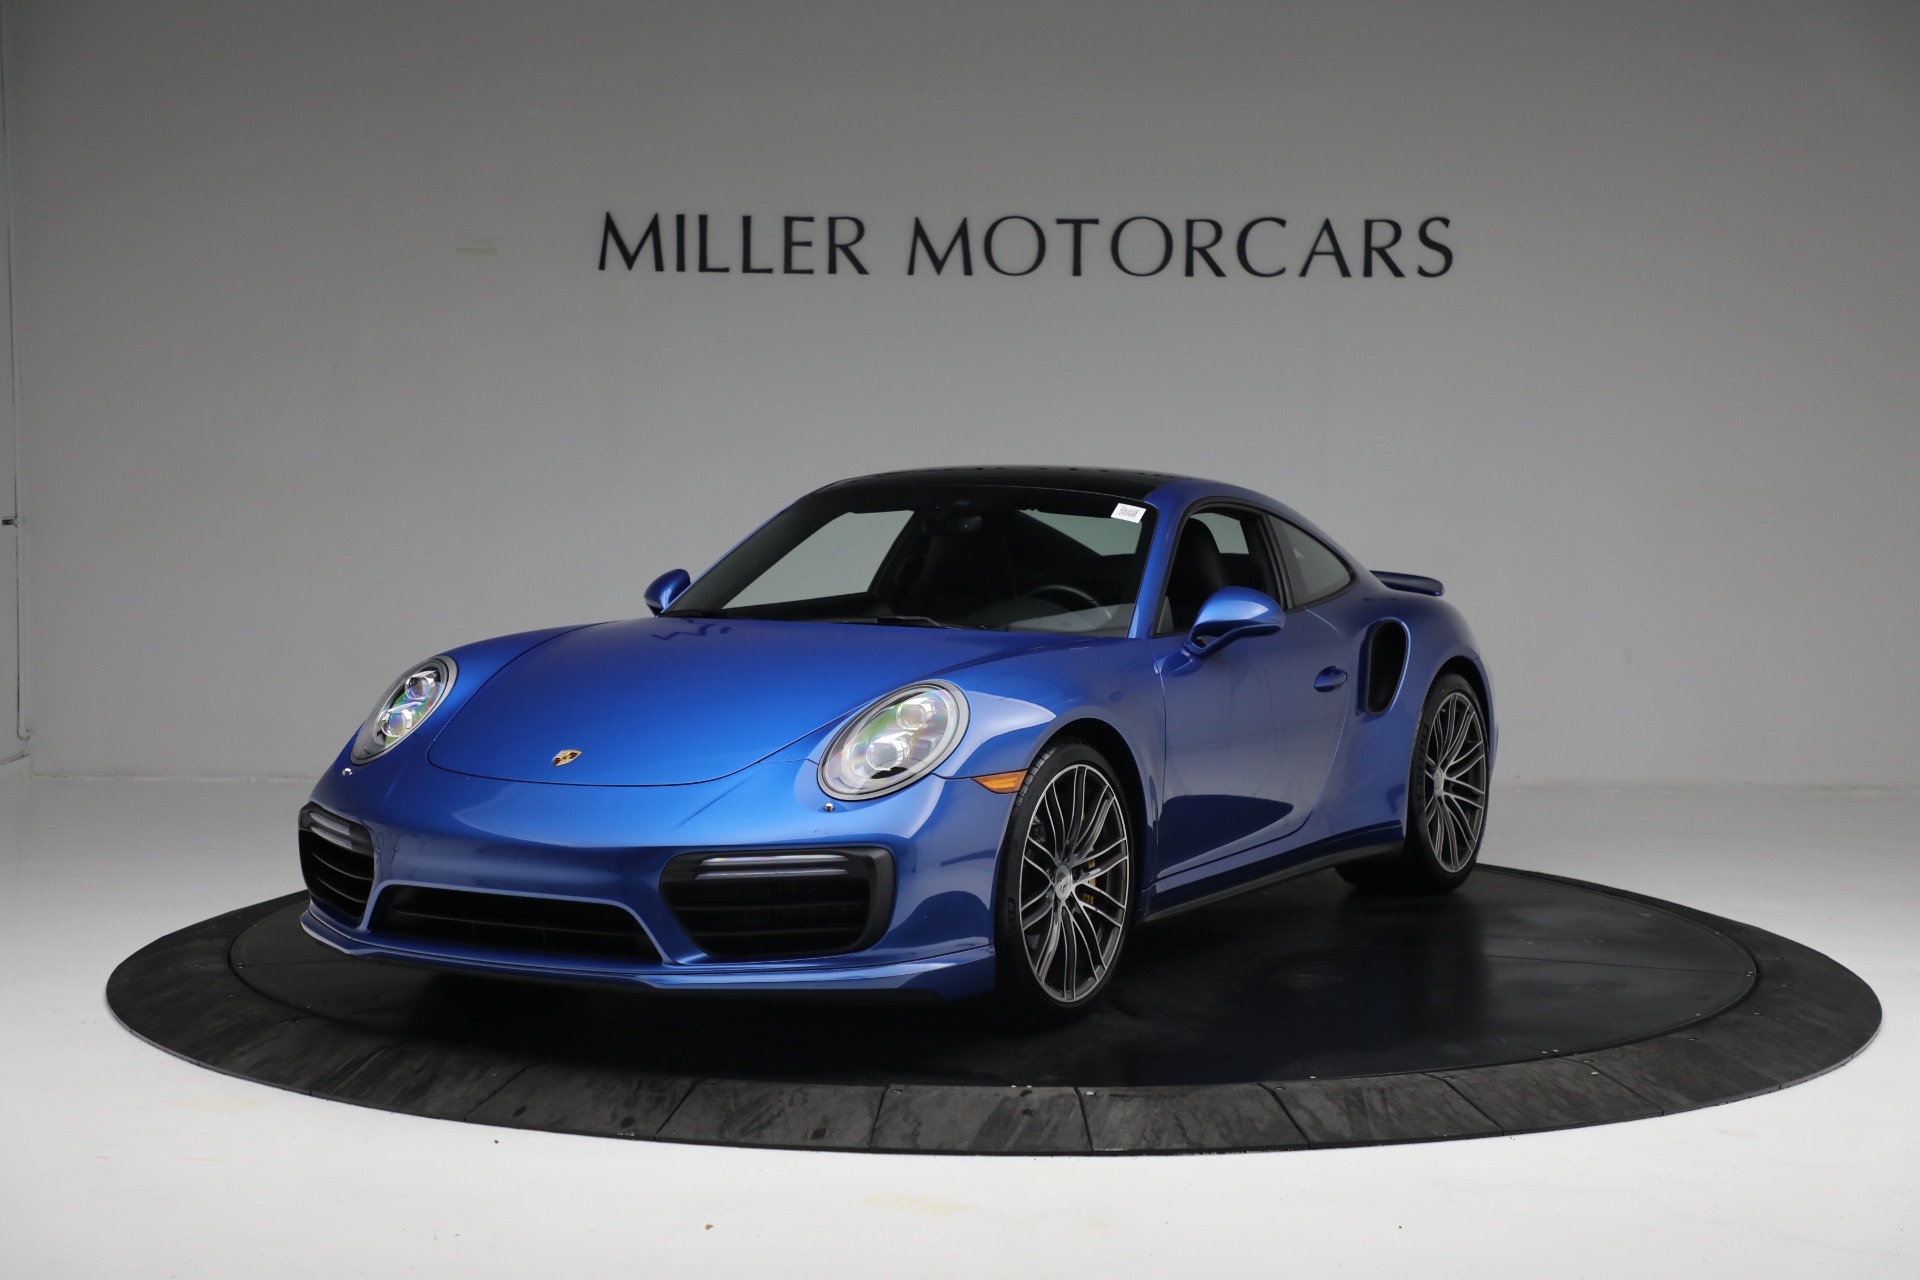 Used 2017 Porsche 911 Turbo S for sale $173,900 at Maserati of Greenwich in Greenwich CT 06830 1